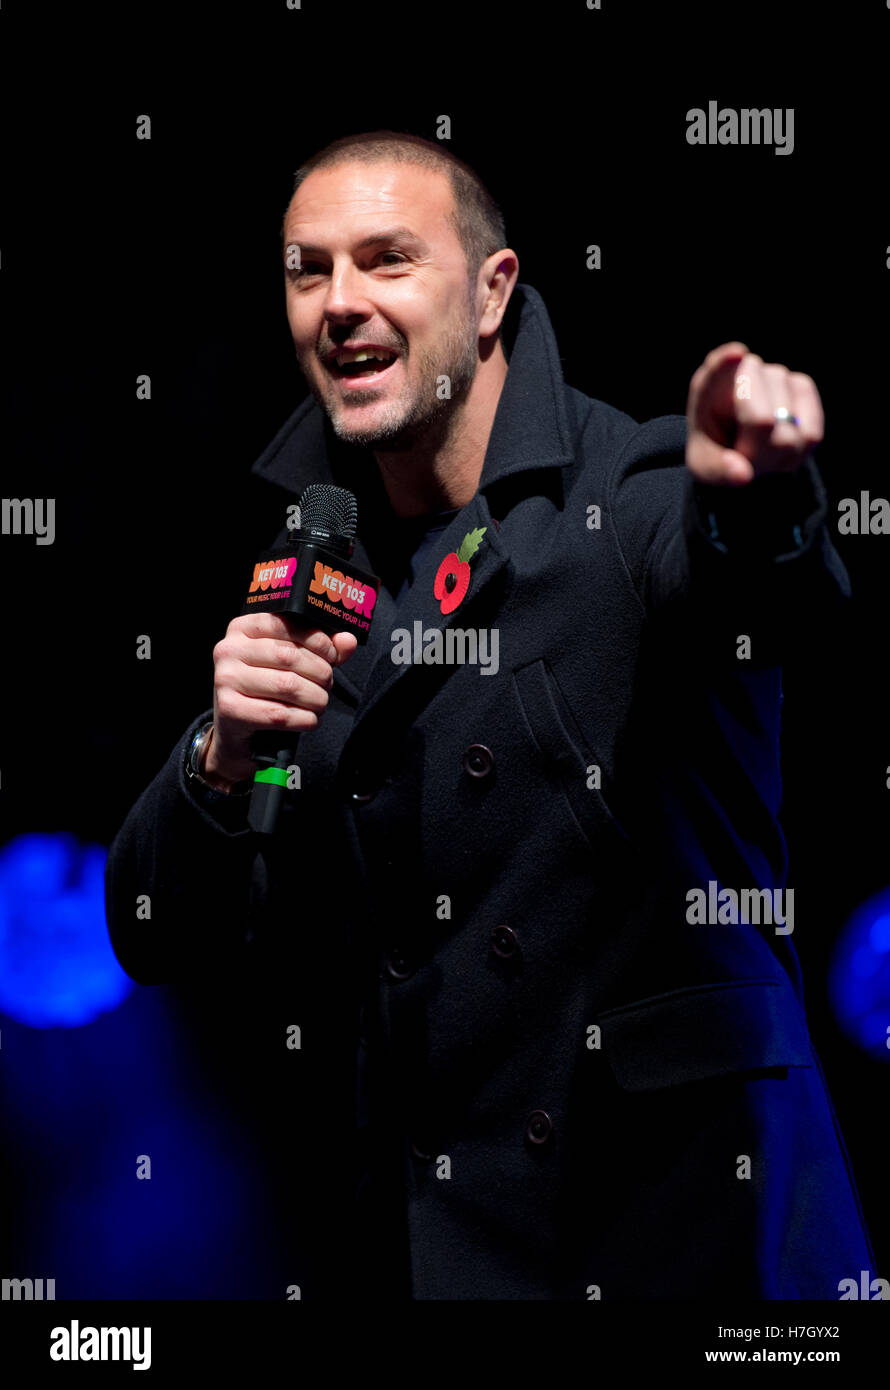 Manchester, UK. 4th November 2016. TV personality Paddy McGuinness hosts the annual Christmas Lights Switch-on in Albert Square, Manchester. Credit:  Russell Hart/Alamy Live News. Stock Photo